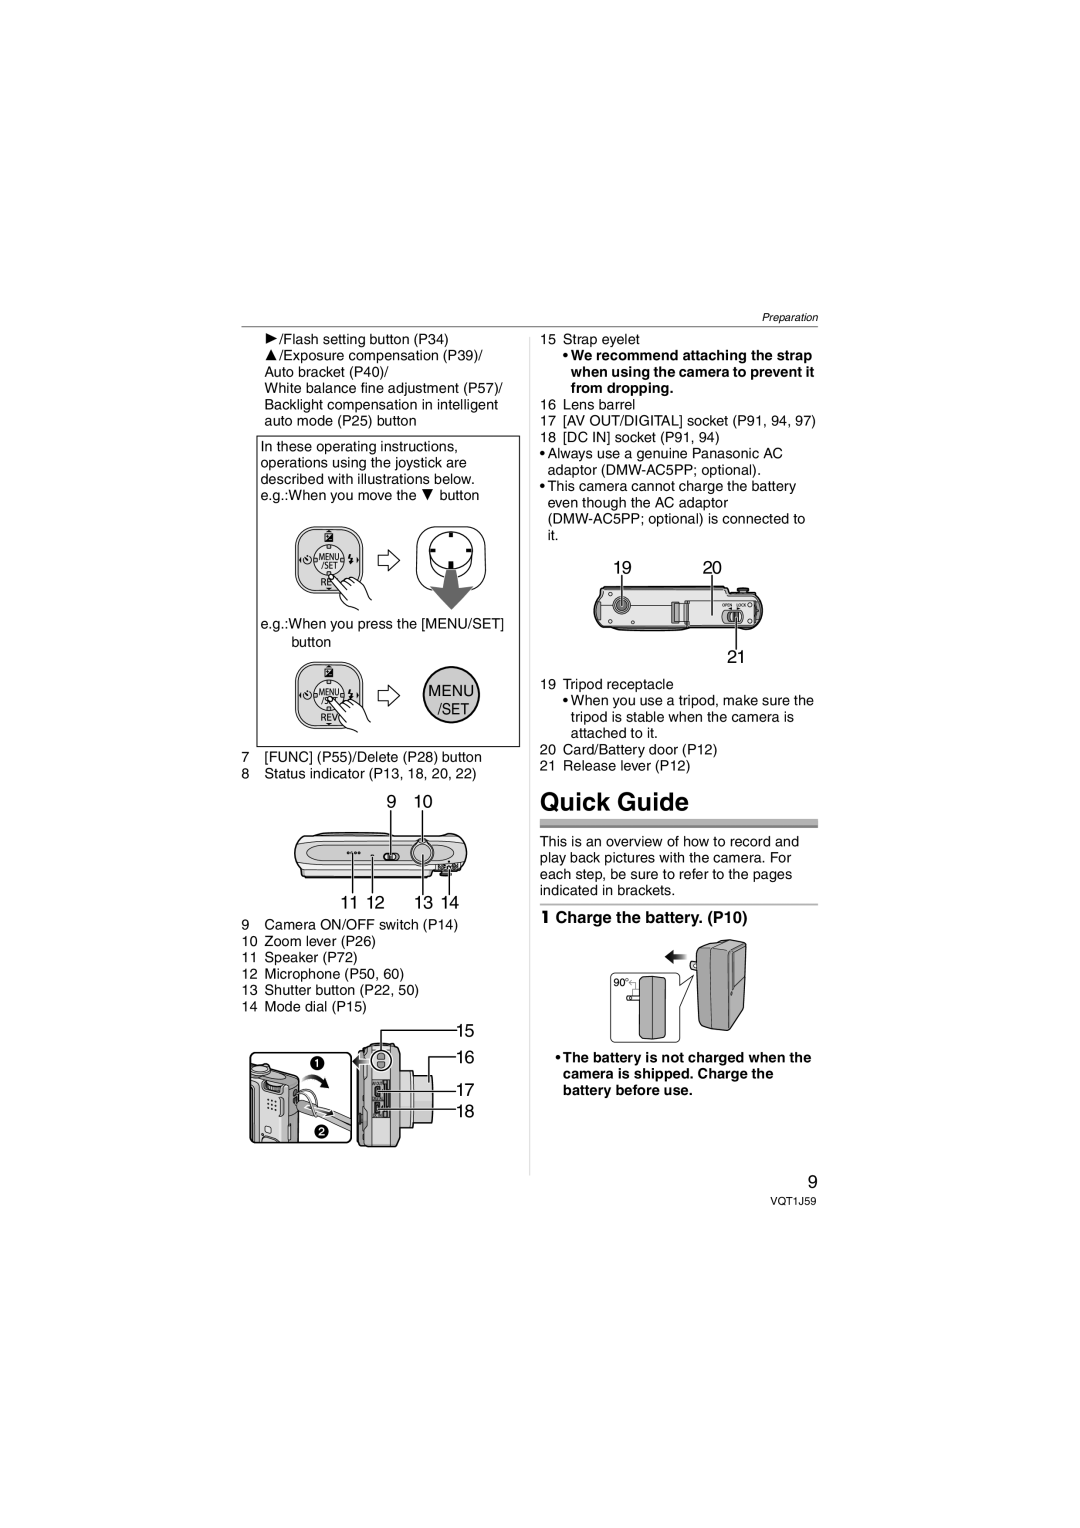 Panasonic DMC-FX55 operating instructions Quick Guide, Charge the battery. P10 